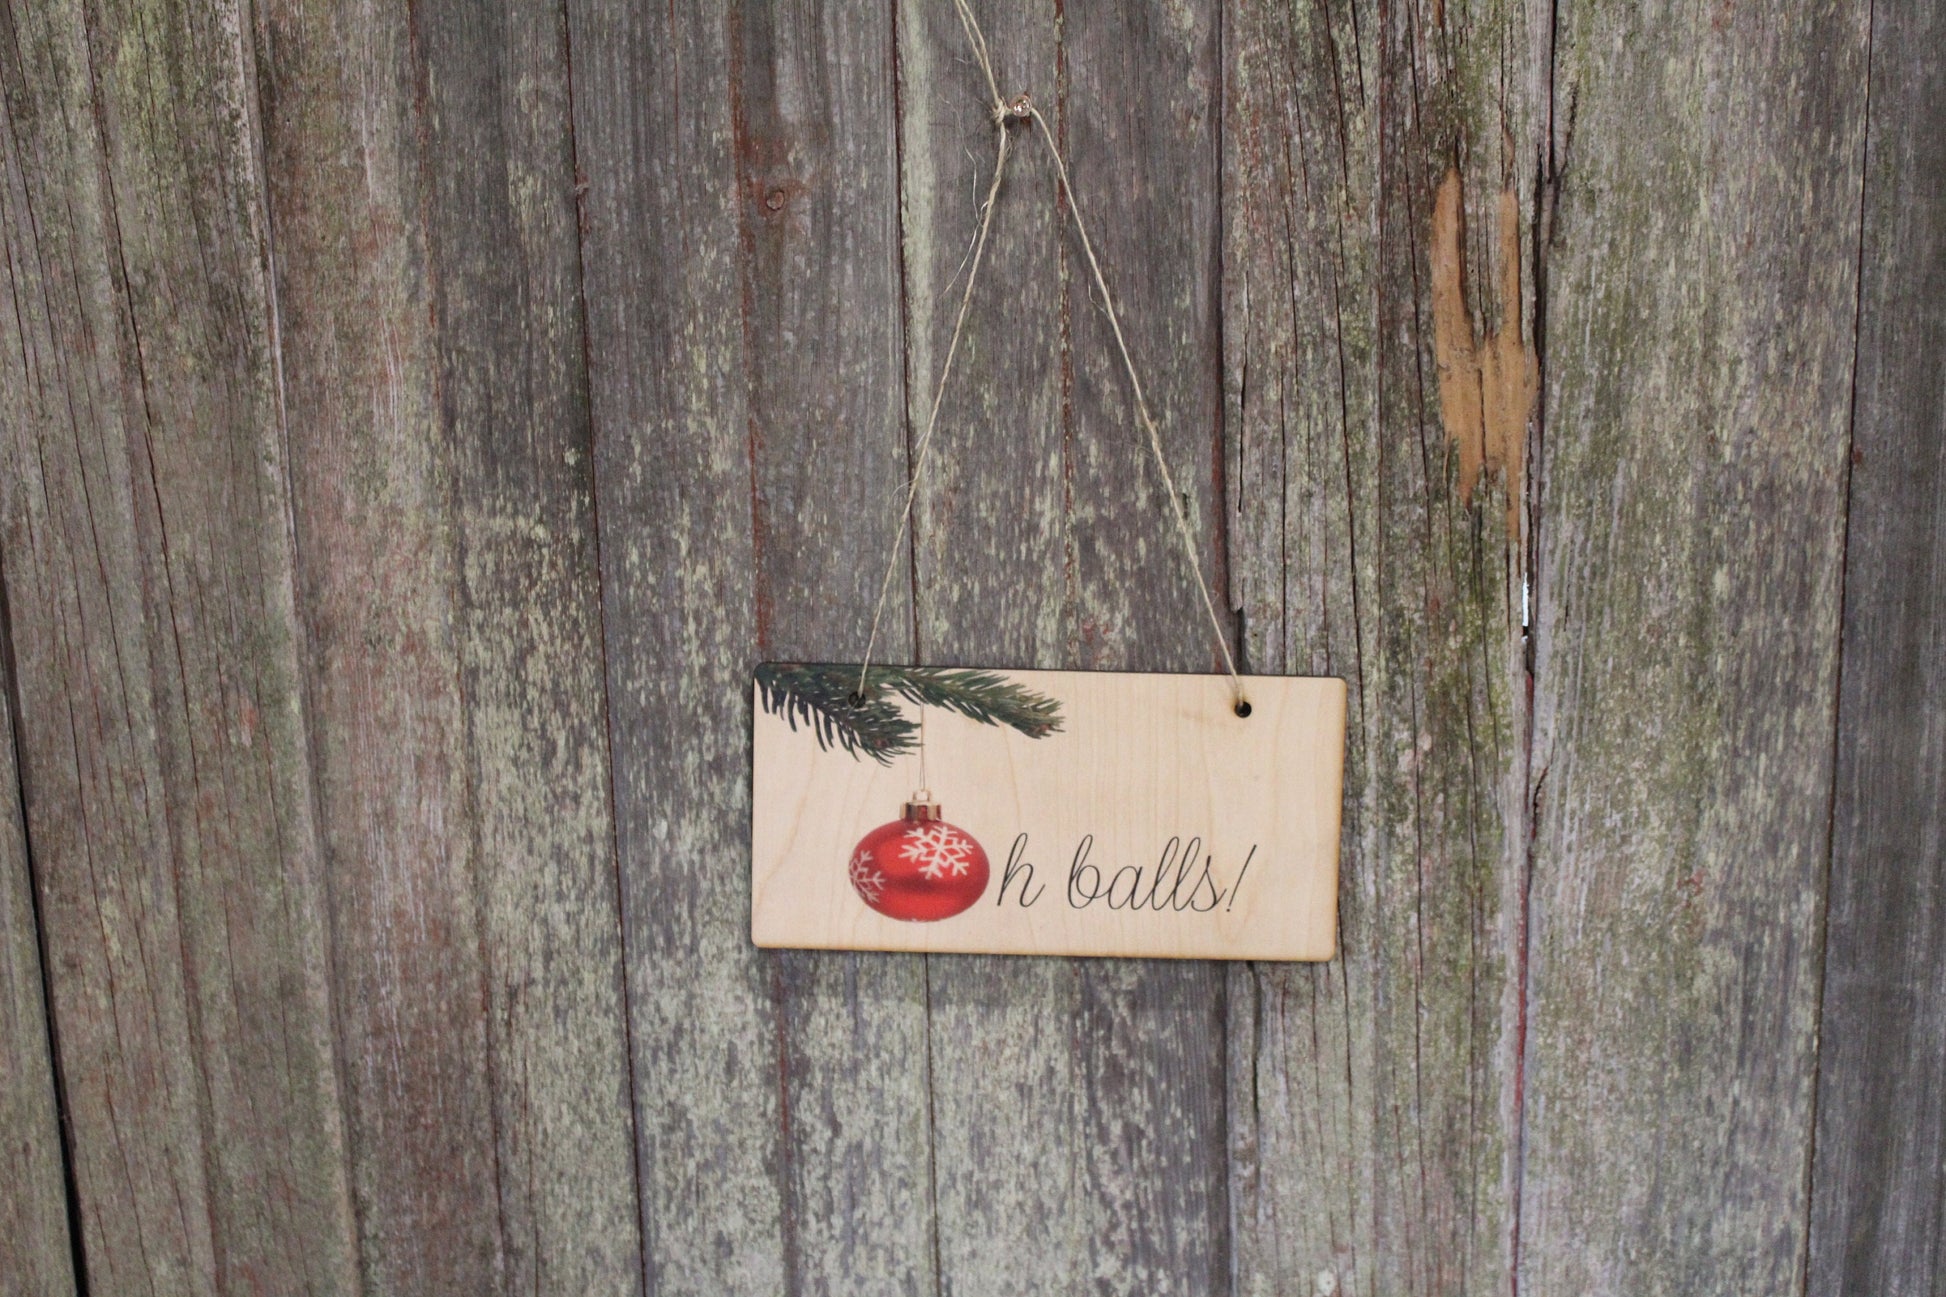 Oh Balls! Wood Sign Christmas Hanging Wall Decoration Decor Winter Ornament Wall Art Home Accent Funny Quote